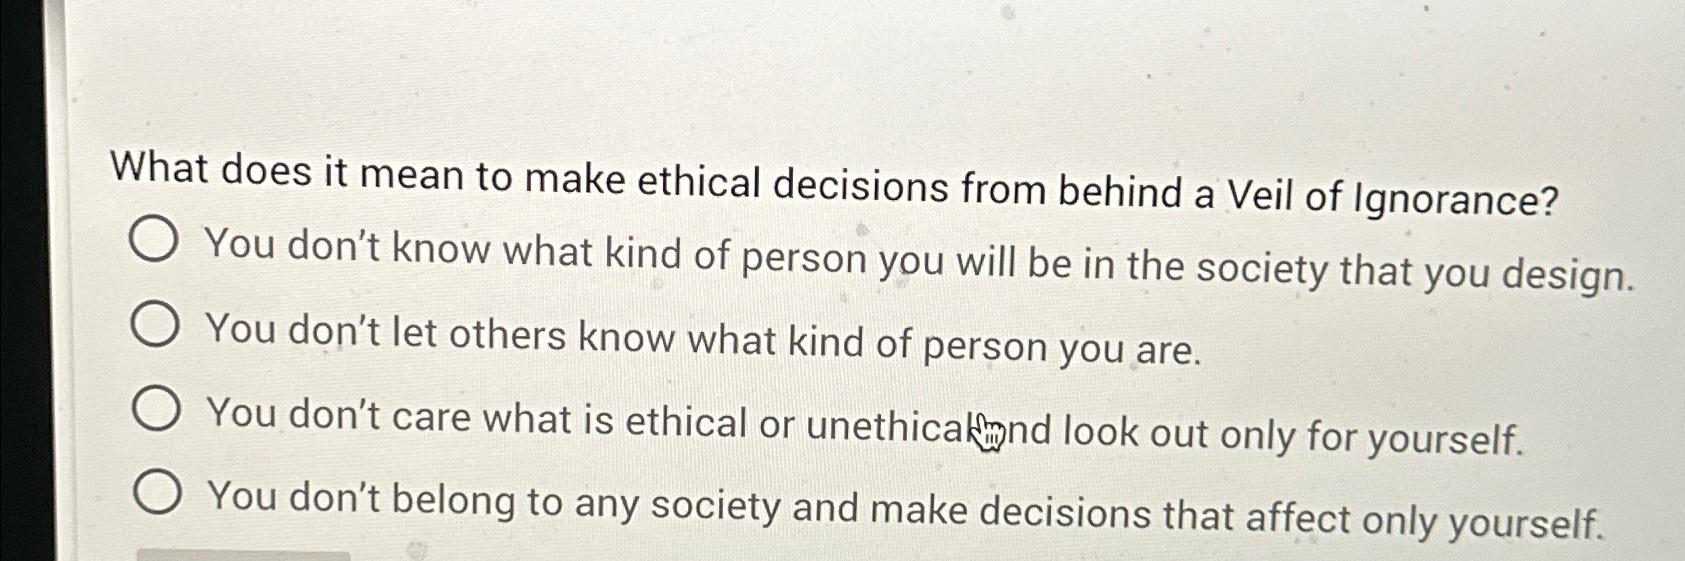 What does it mean to make ethical decisions from behind a Veil of Ignorance? You don't know what kind of